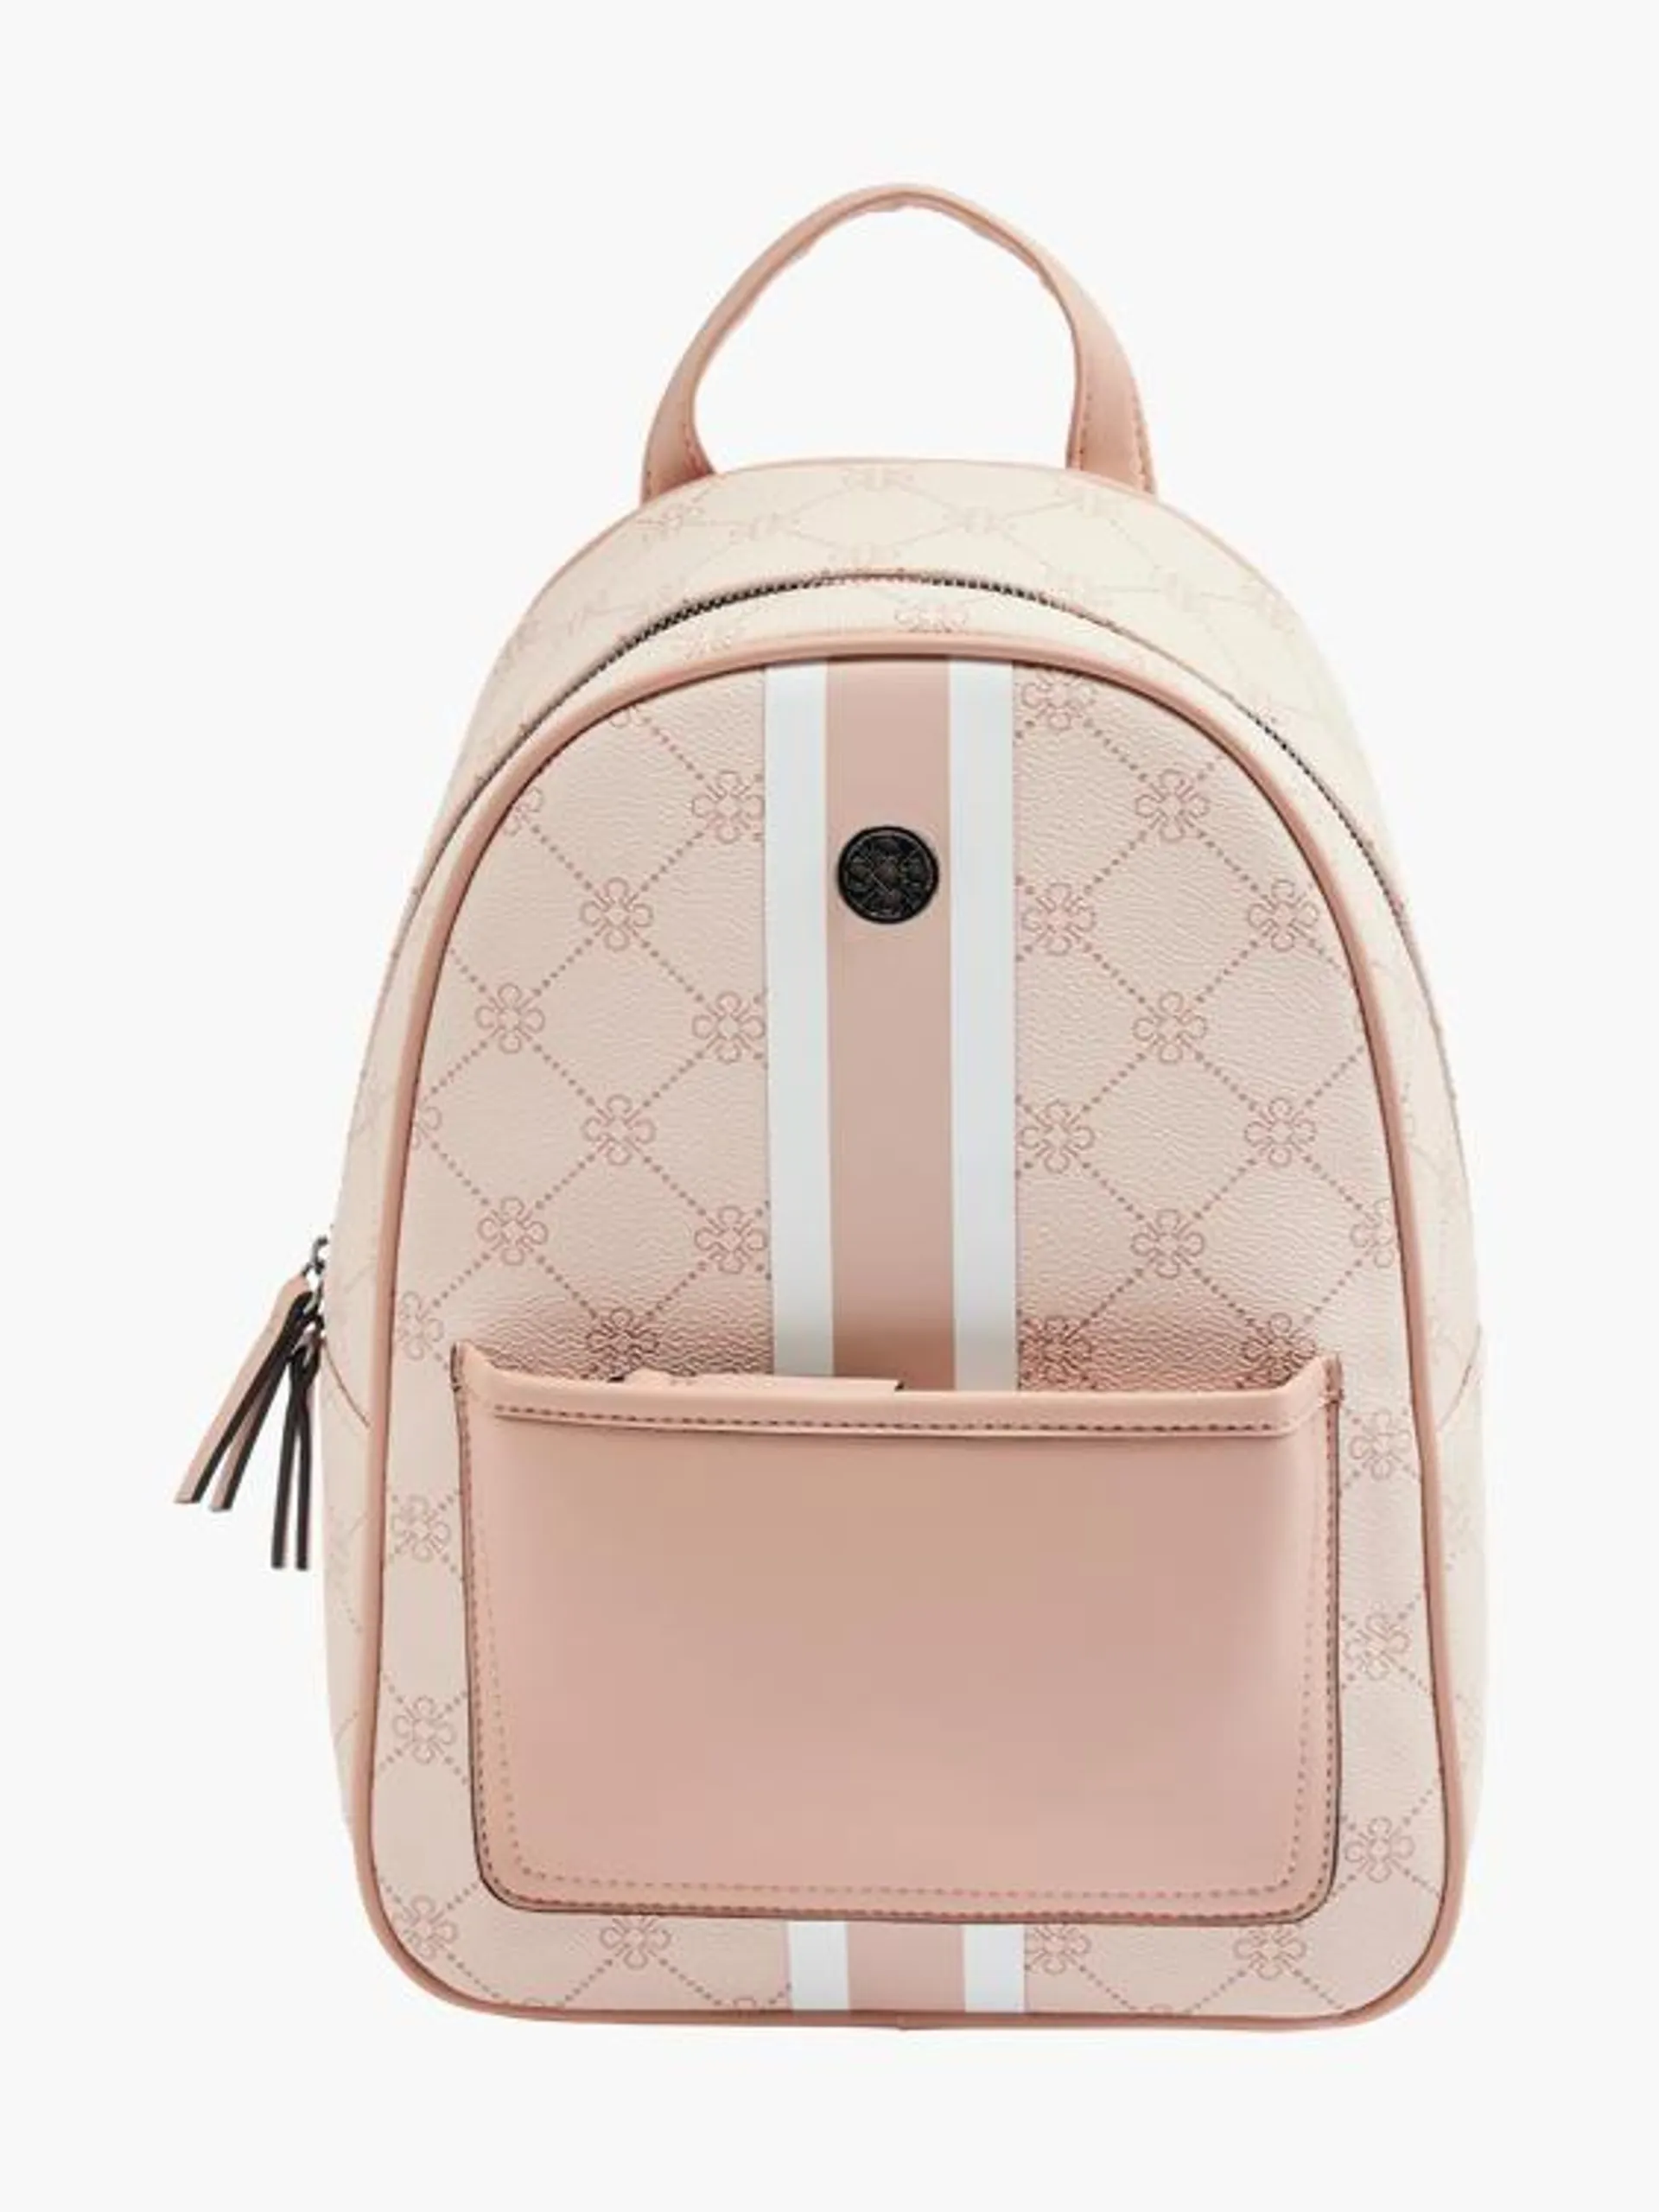 Pink Monogram Backpack with Striped Panelling and Pocket Detail